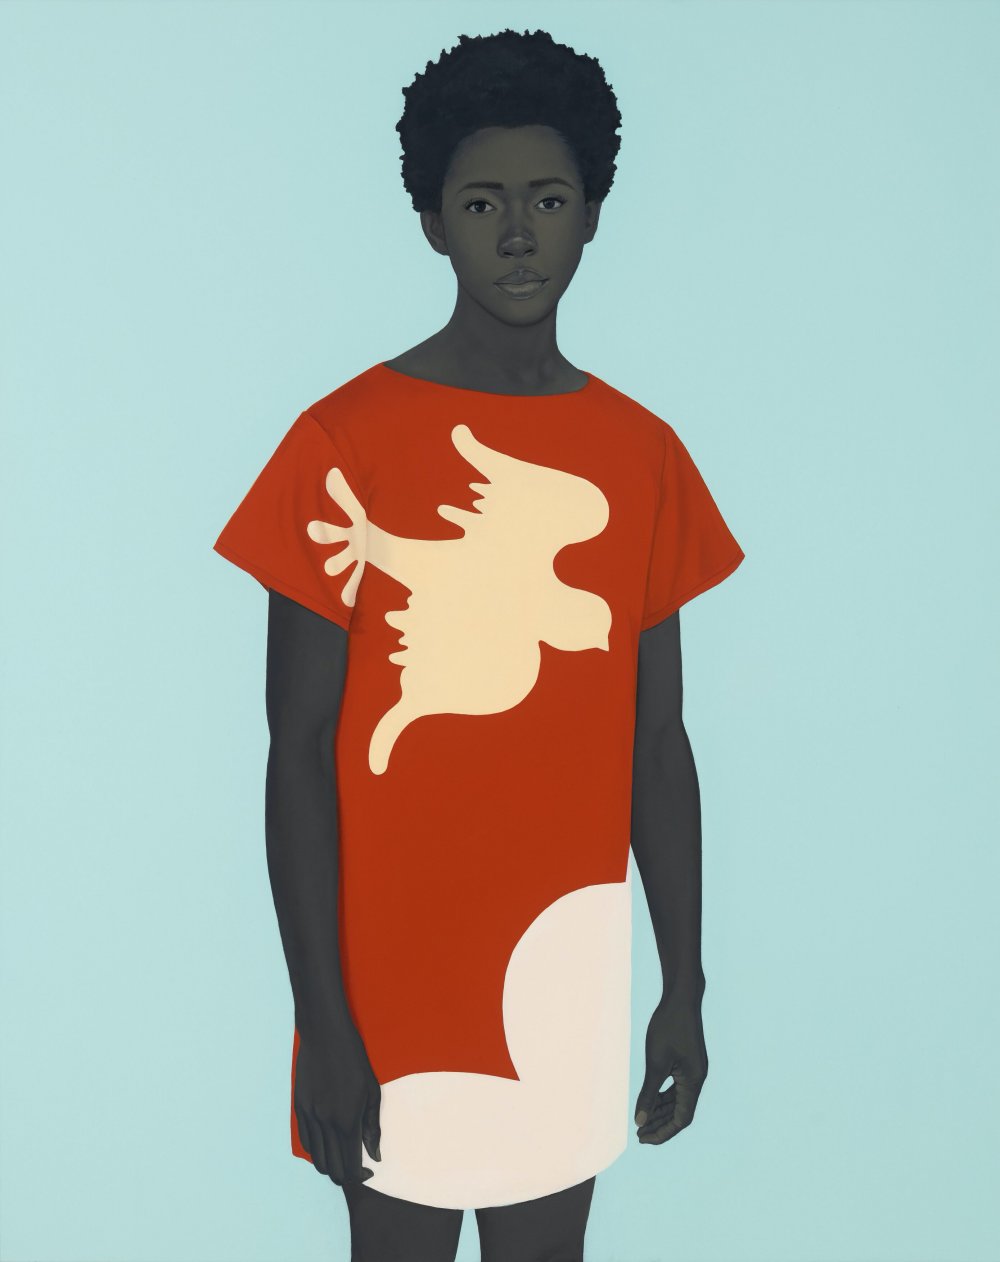 Amy Sherald, Hope is the thing with feathers (The little bird), 2020